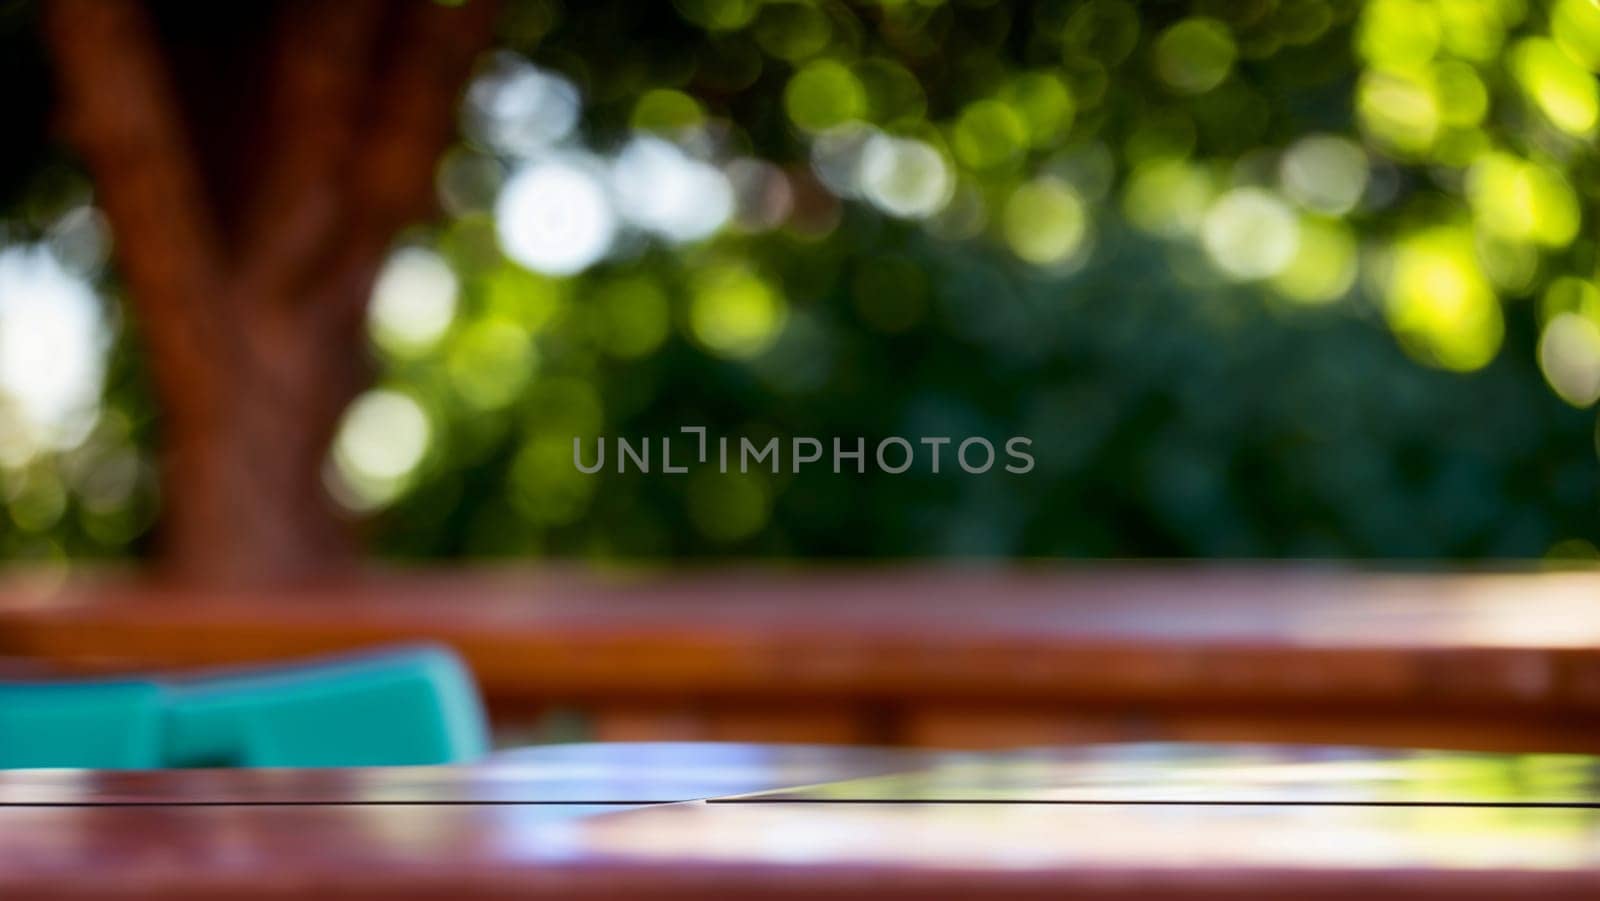 Decorative background with dark wooden table top in an outdoor garden with trees in the background. by XabiDonostia